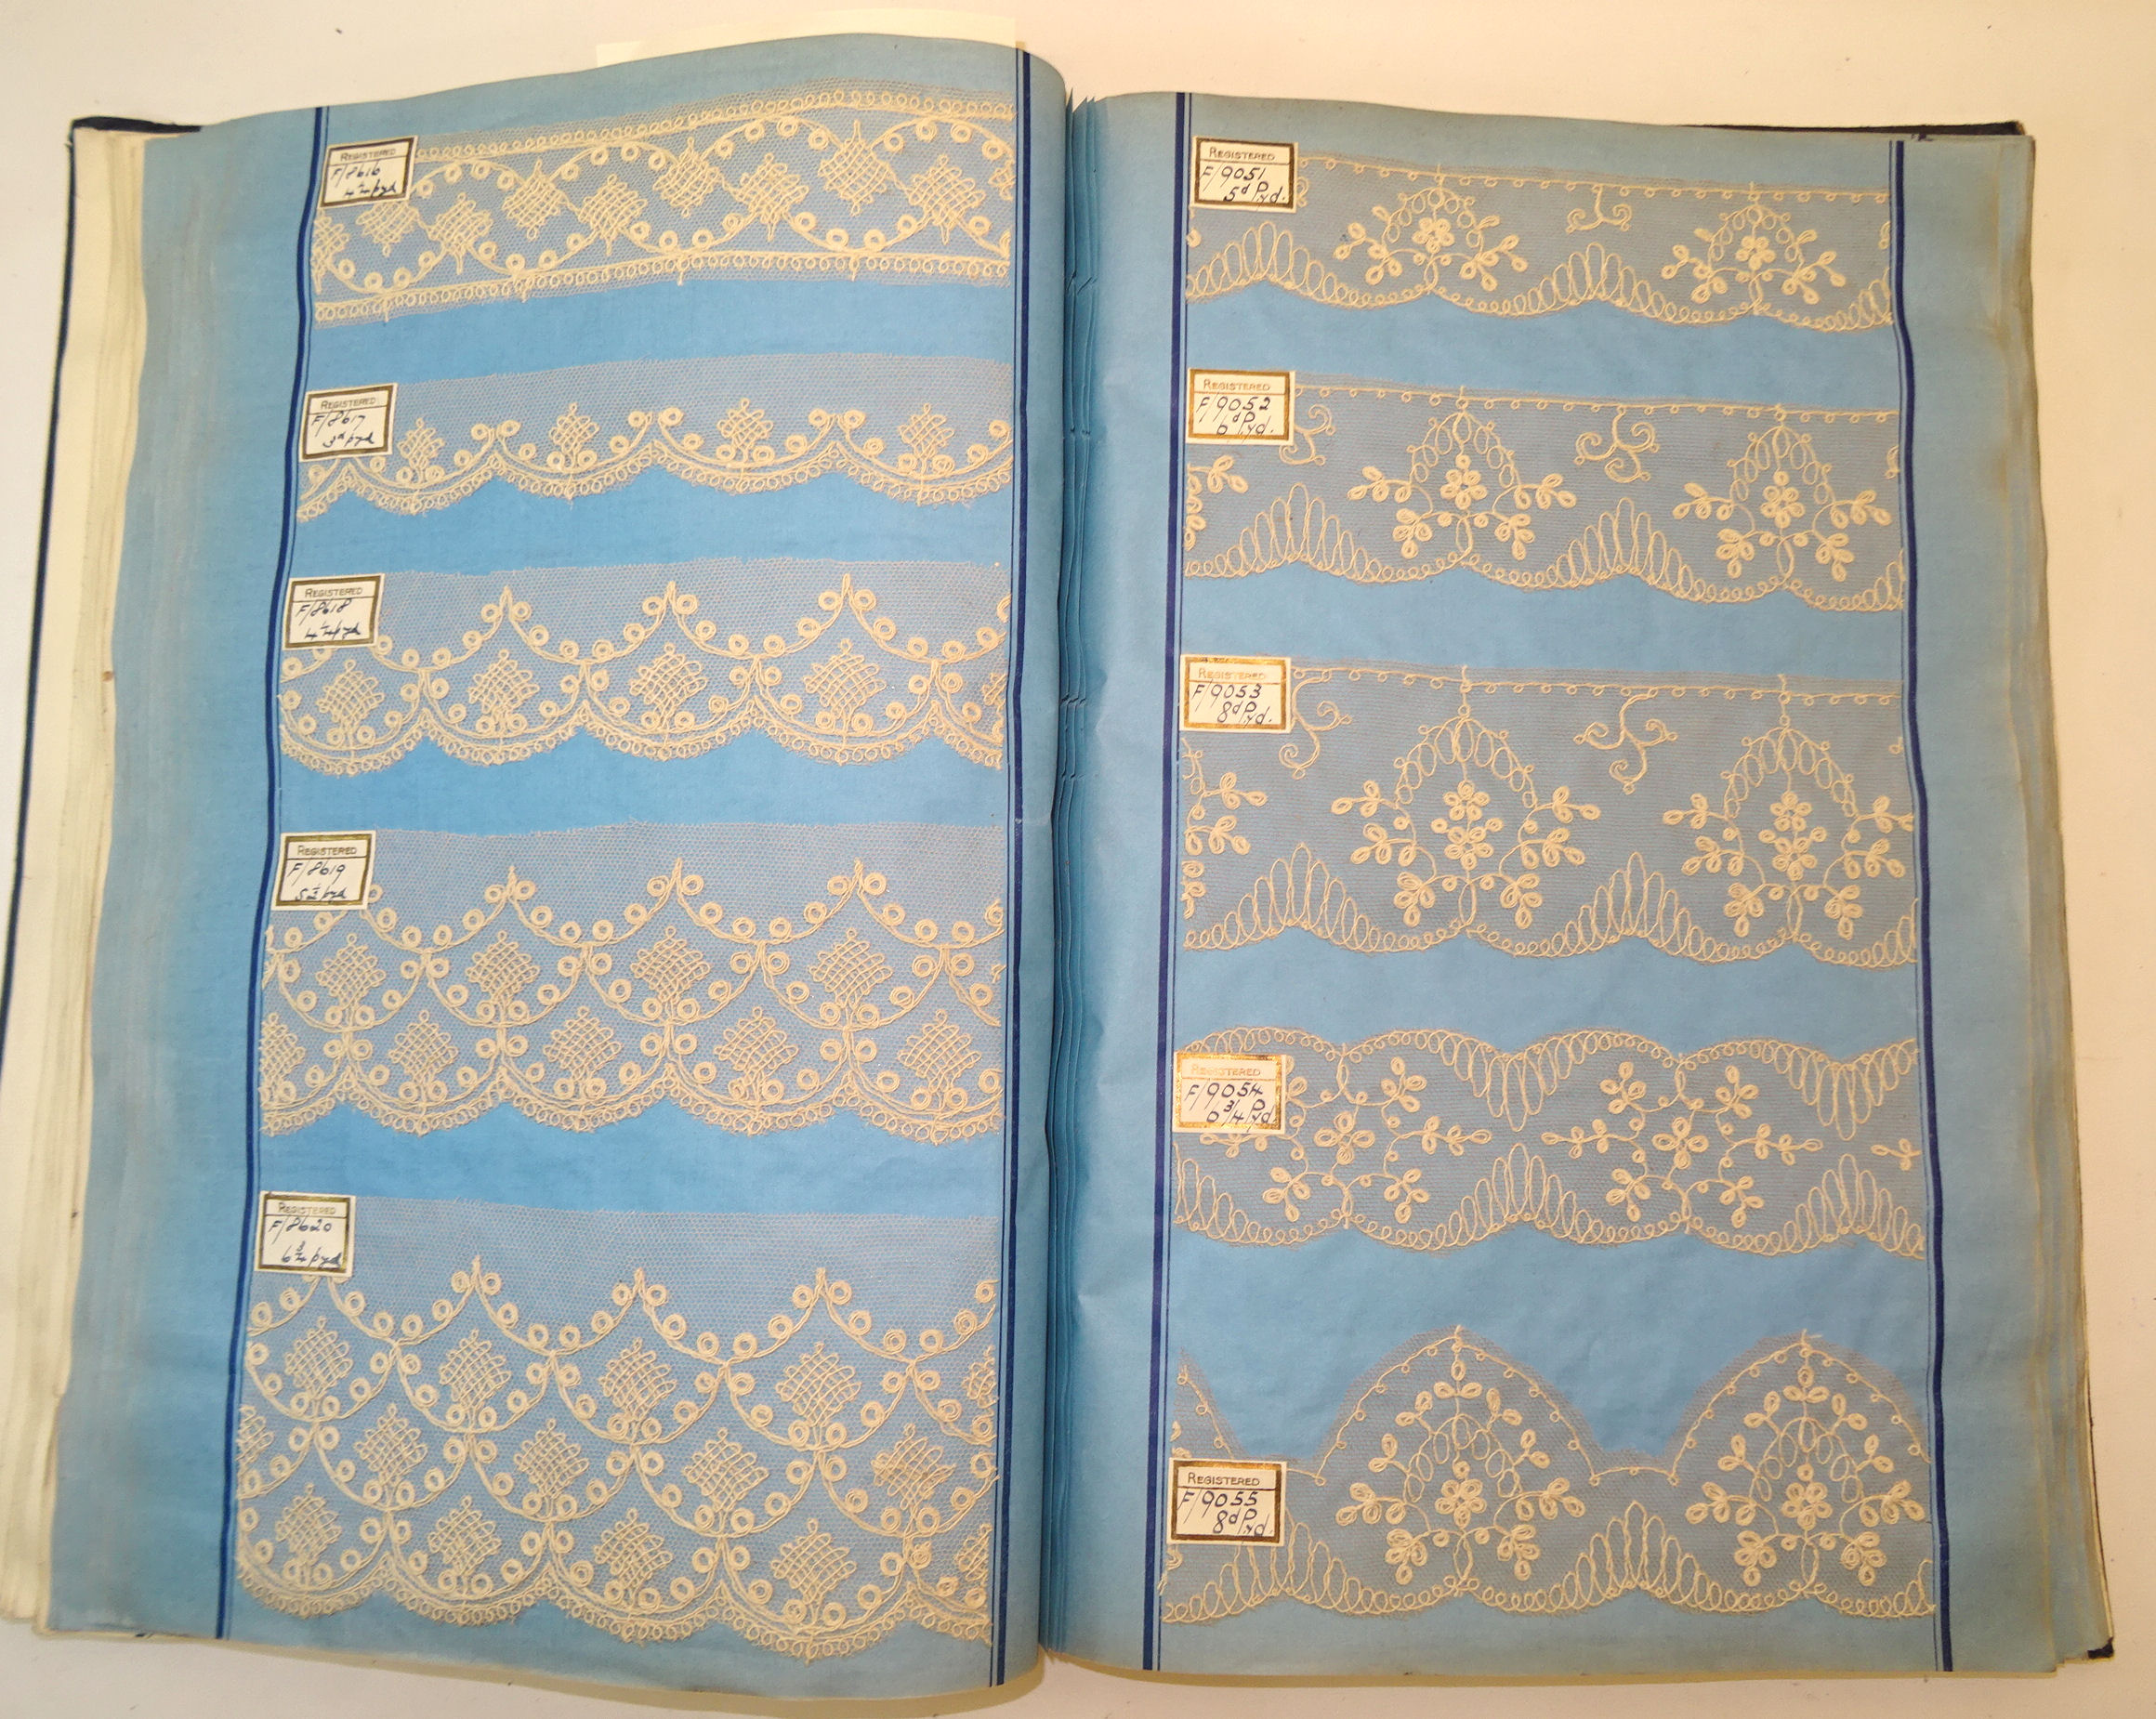 An Album of Vintage Lace Samples entitled "Newest Laces" by P B & B Limited. - Image 4 of 6